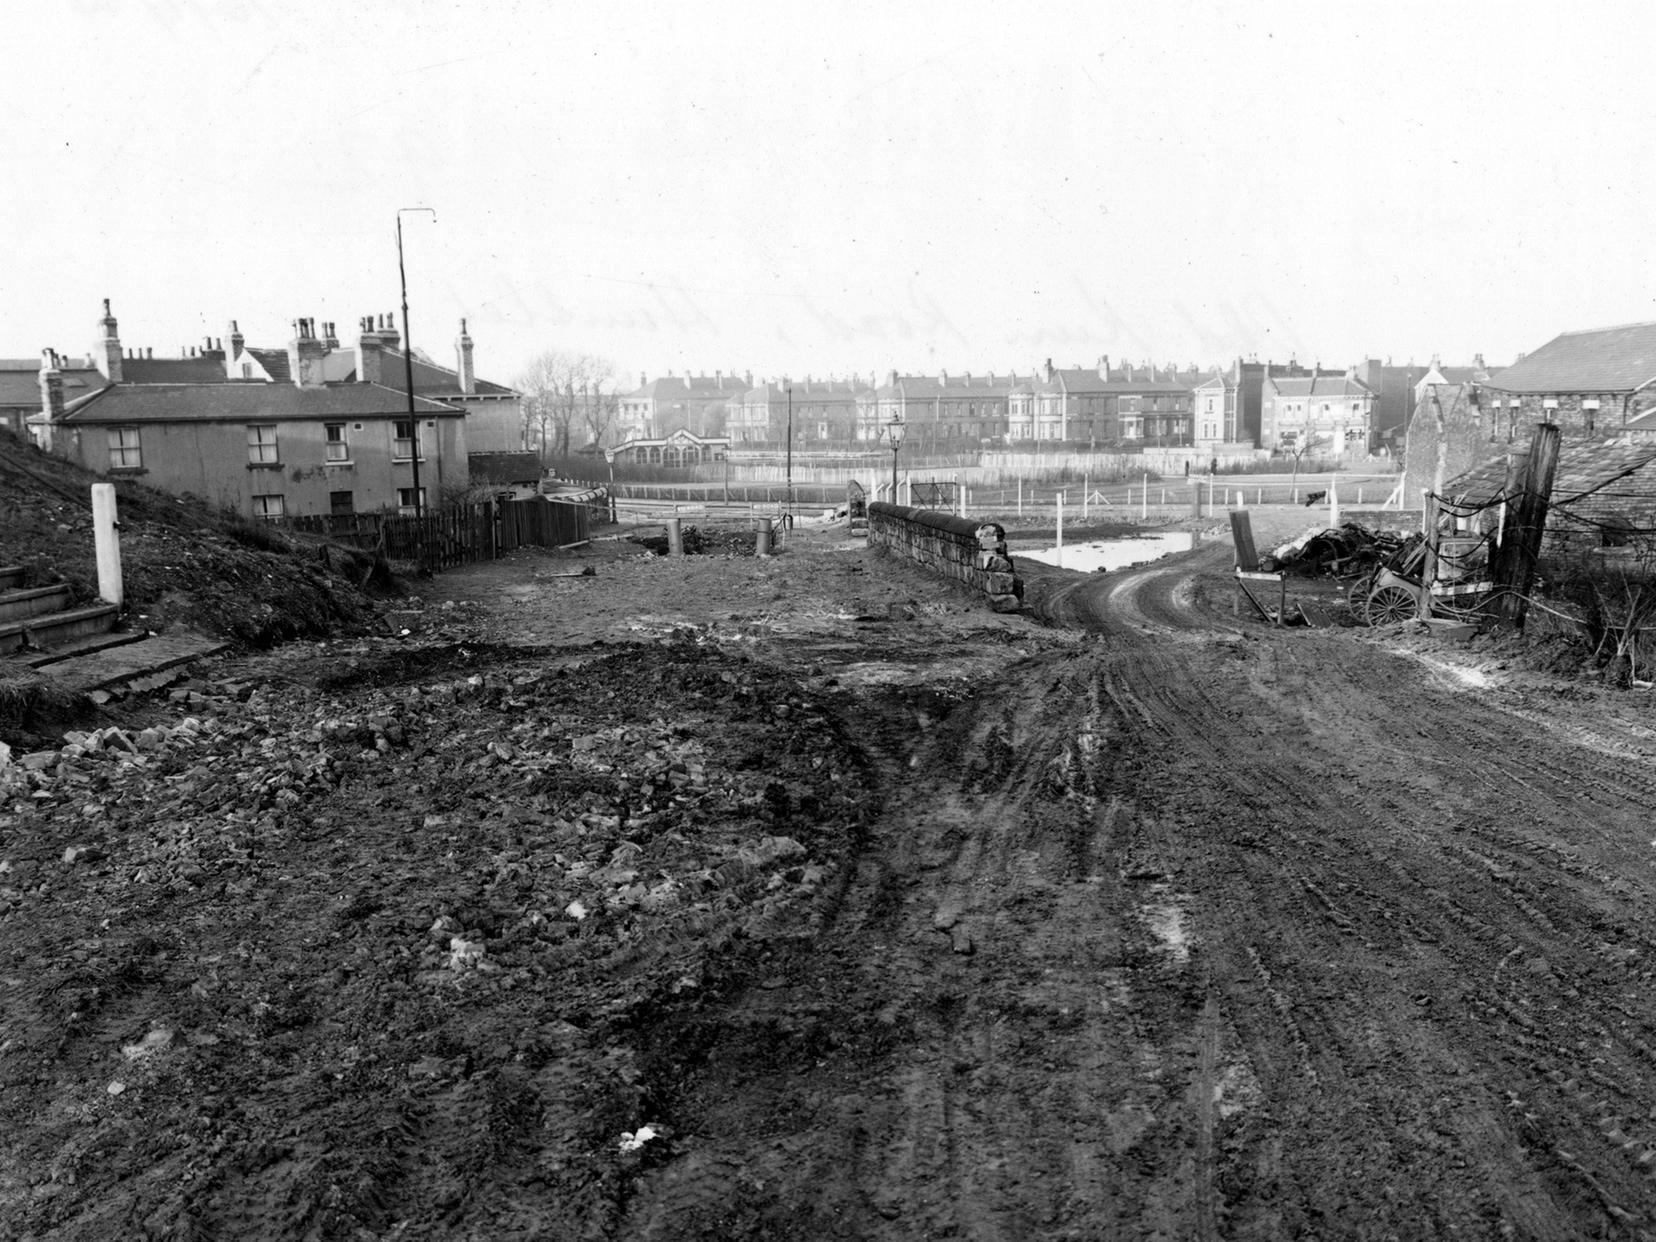 Old Run Road in Hunslet looking north towards Moor Road. Engine farm is to the left of the photograph.